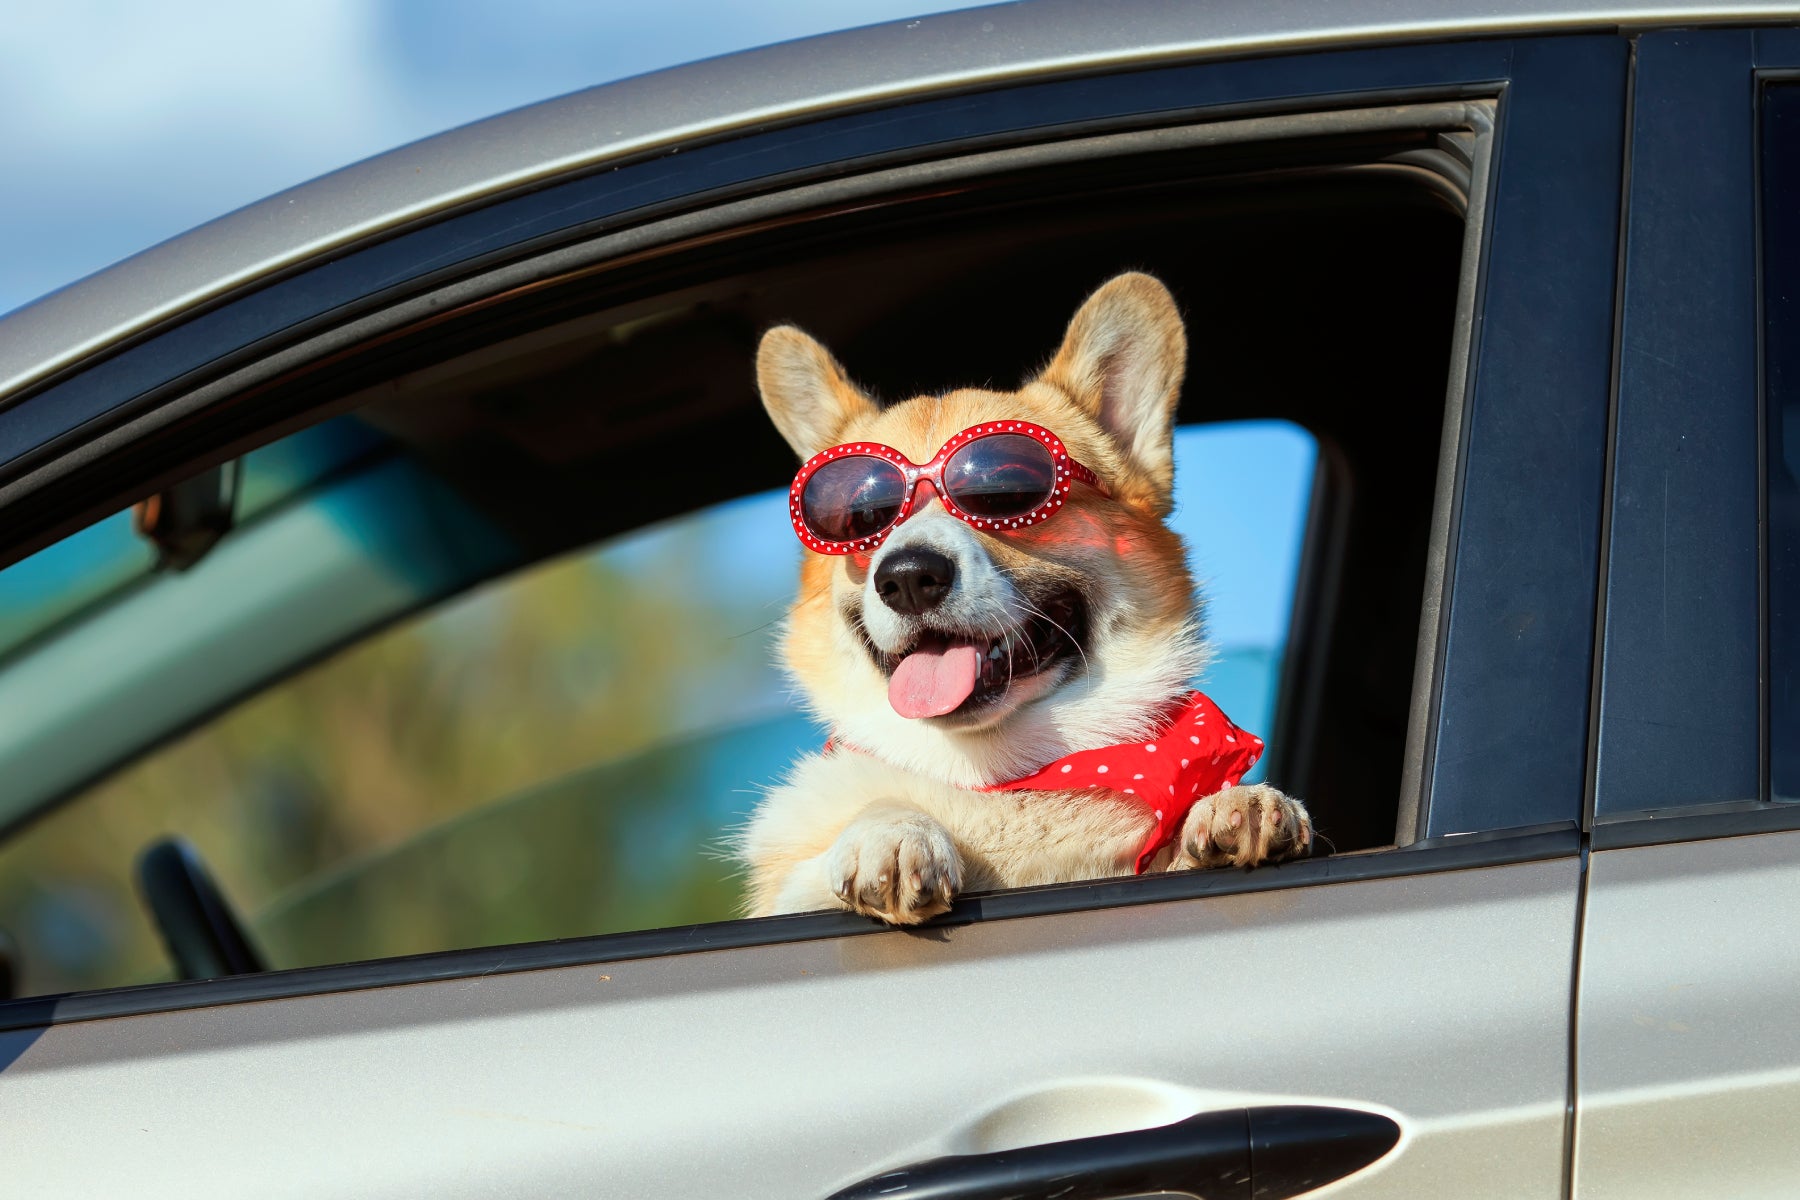 Dog Car Accessories | Corgi with goggles looking out front car window smiling